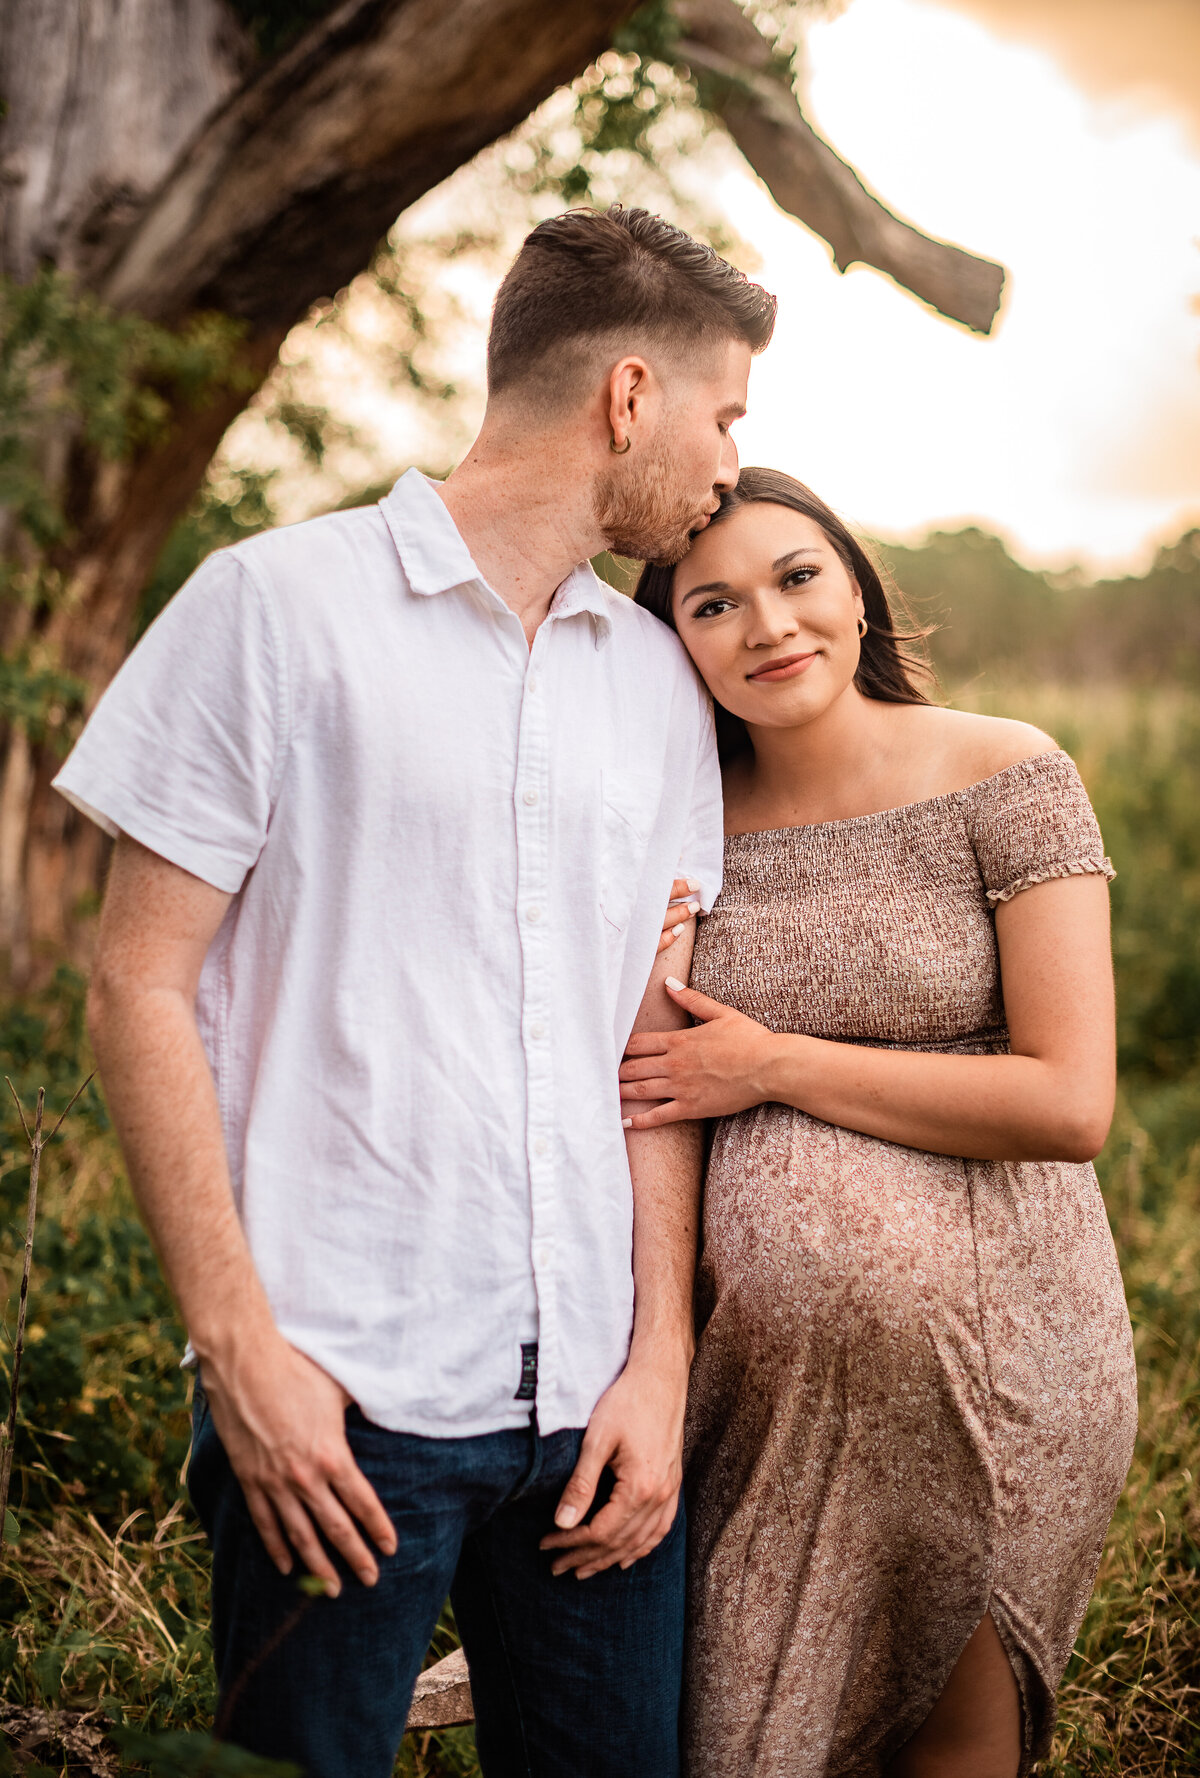 An expectant mother hugs her boyfriend's arm while he kisses the top of her head.